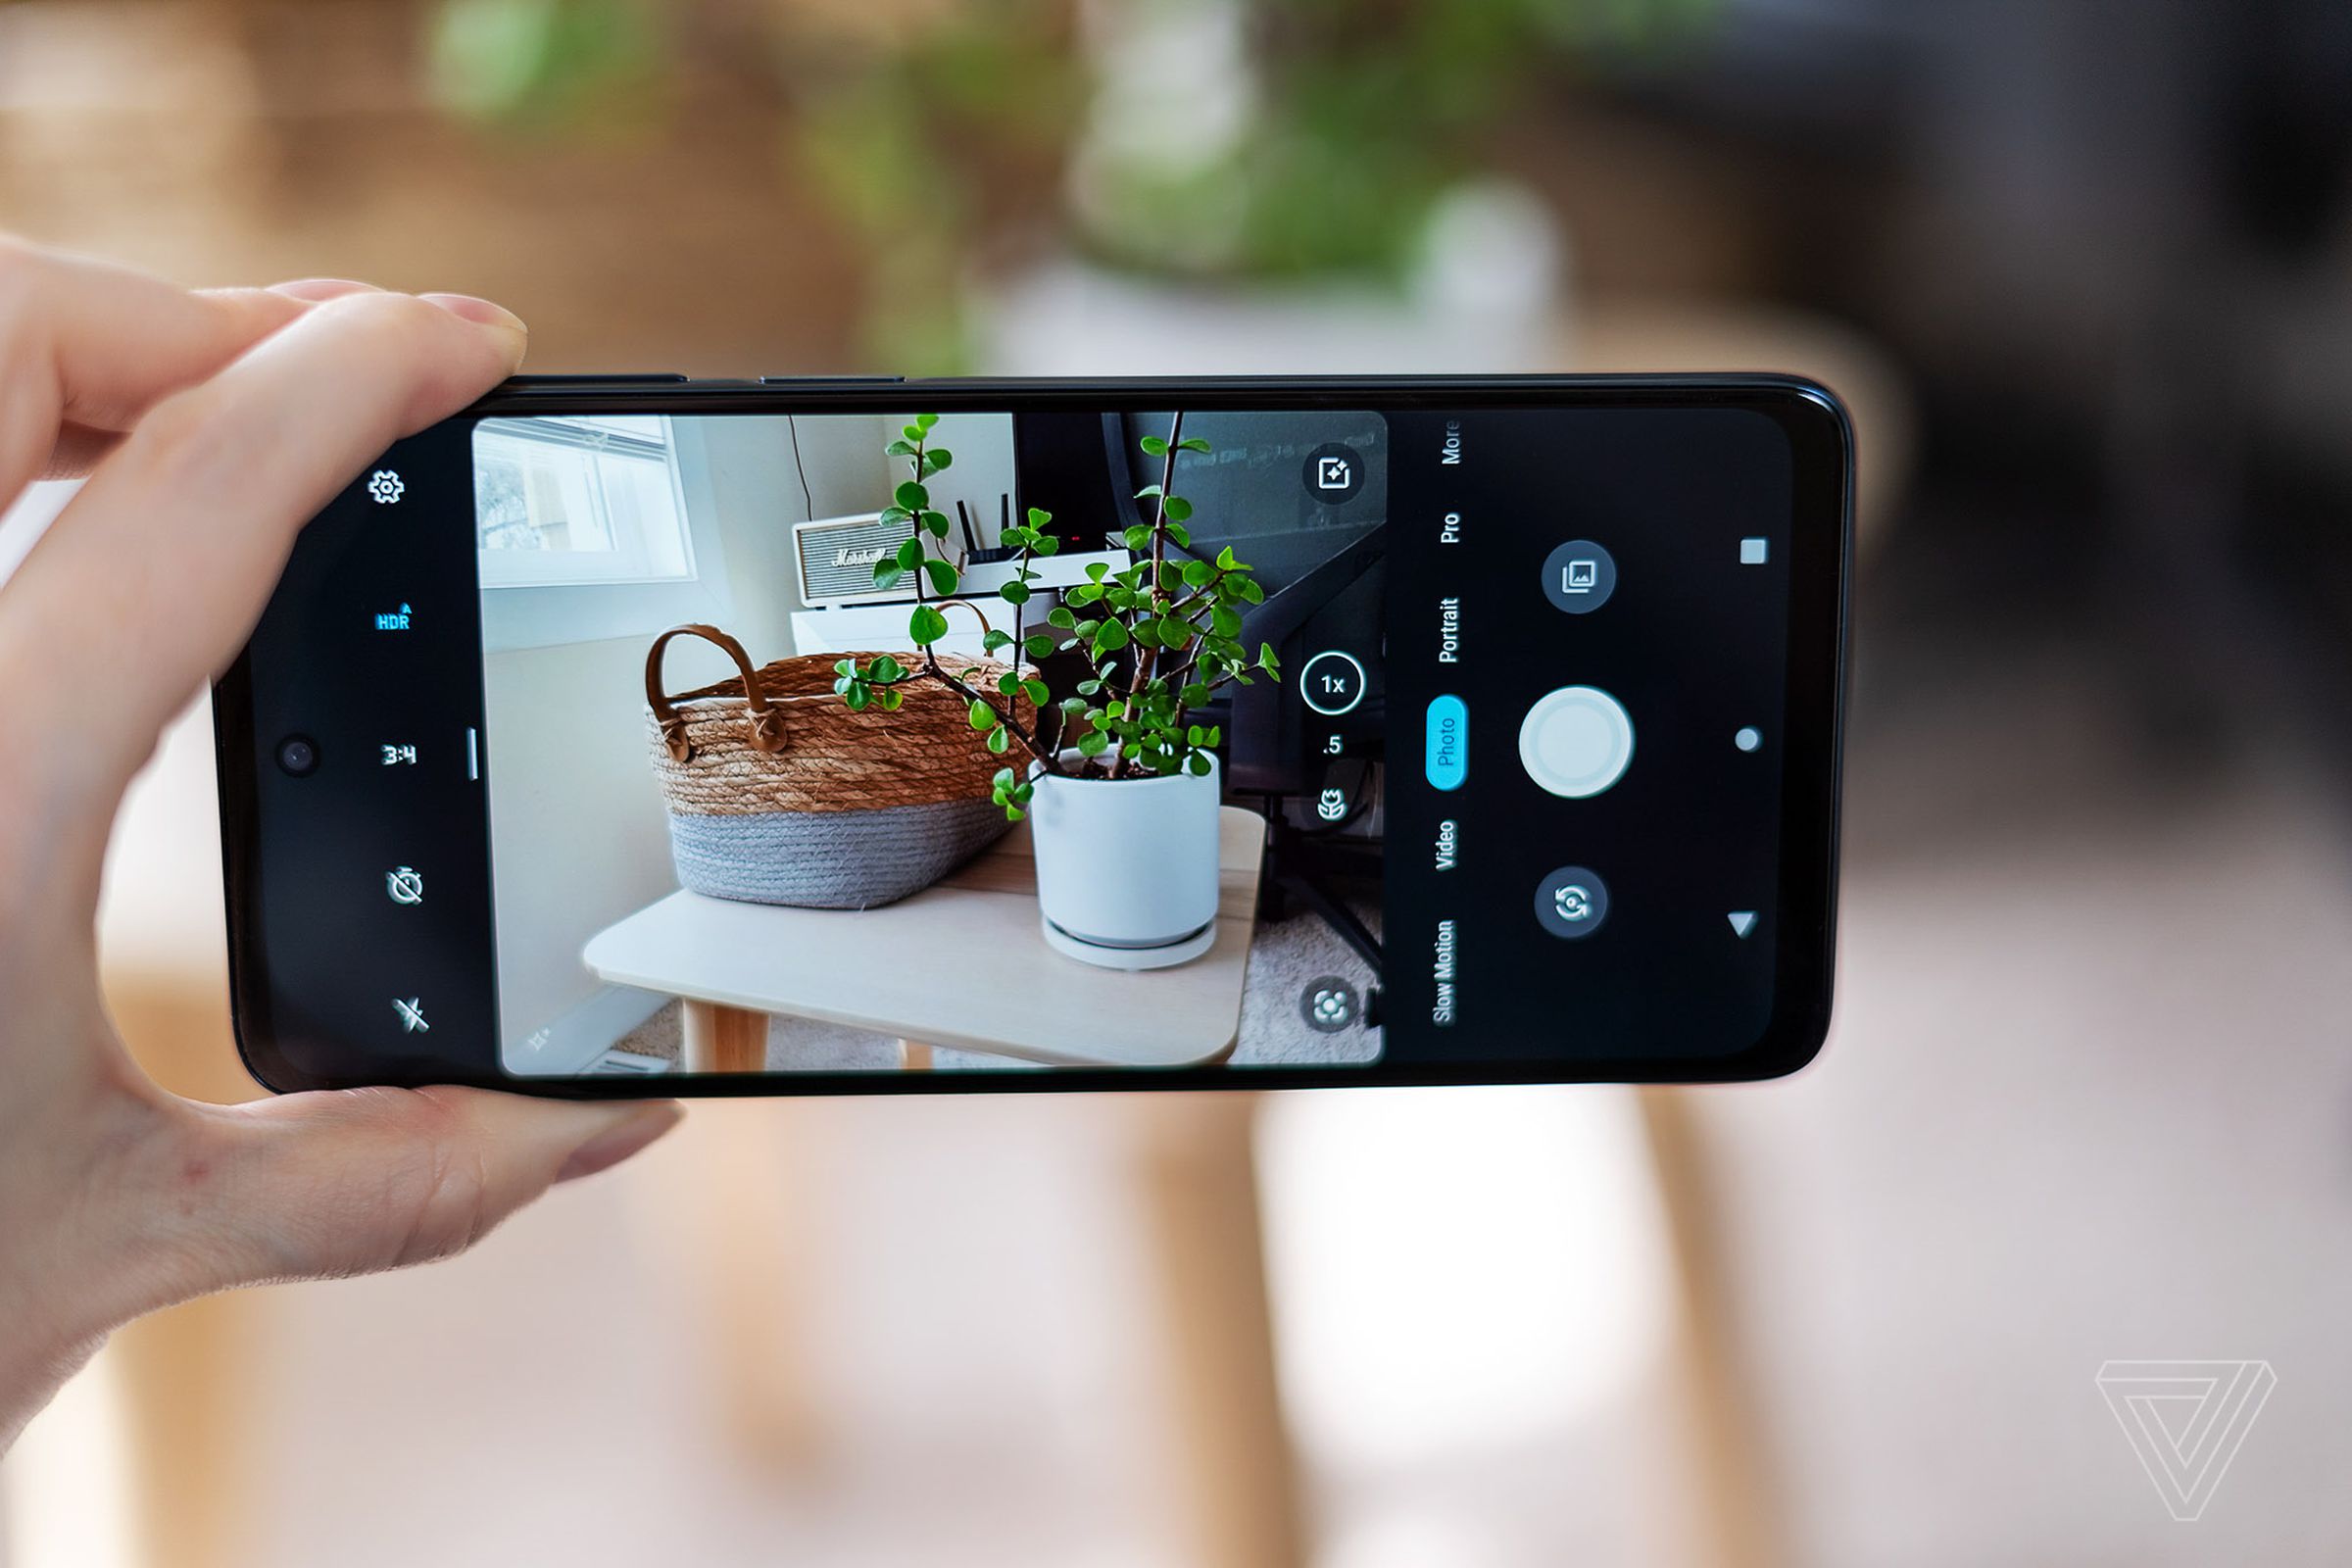 The phone’s main rear camera includes optical stabilization, which helps keep shots in dim light sharper.